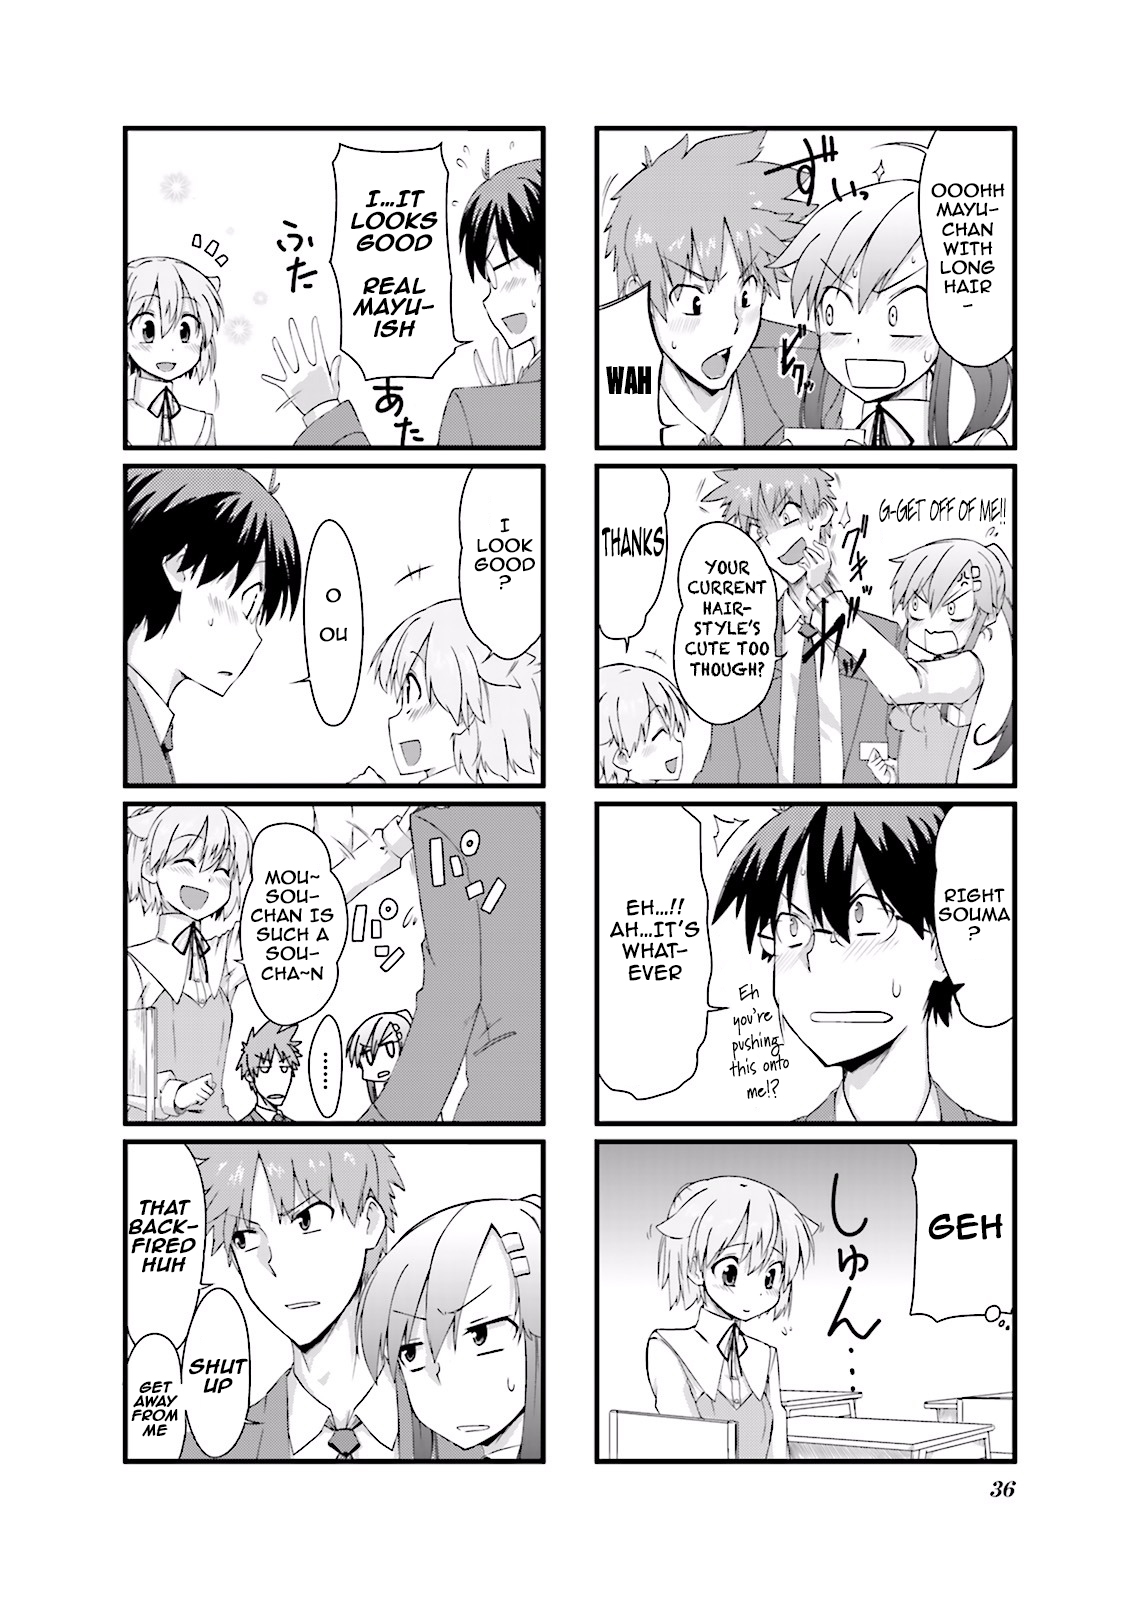 Power of Smile. Vol. 1 Ch. 5